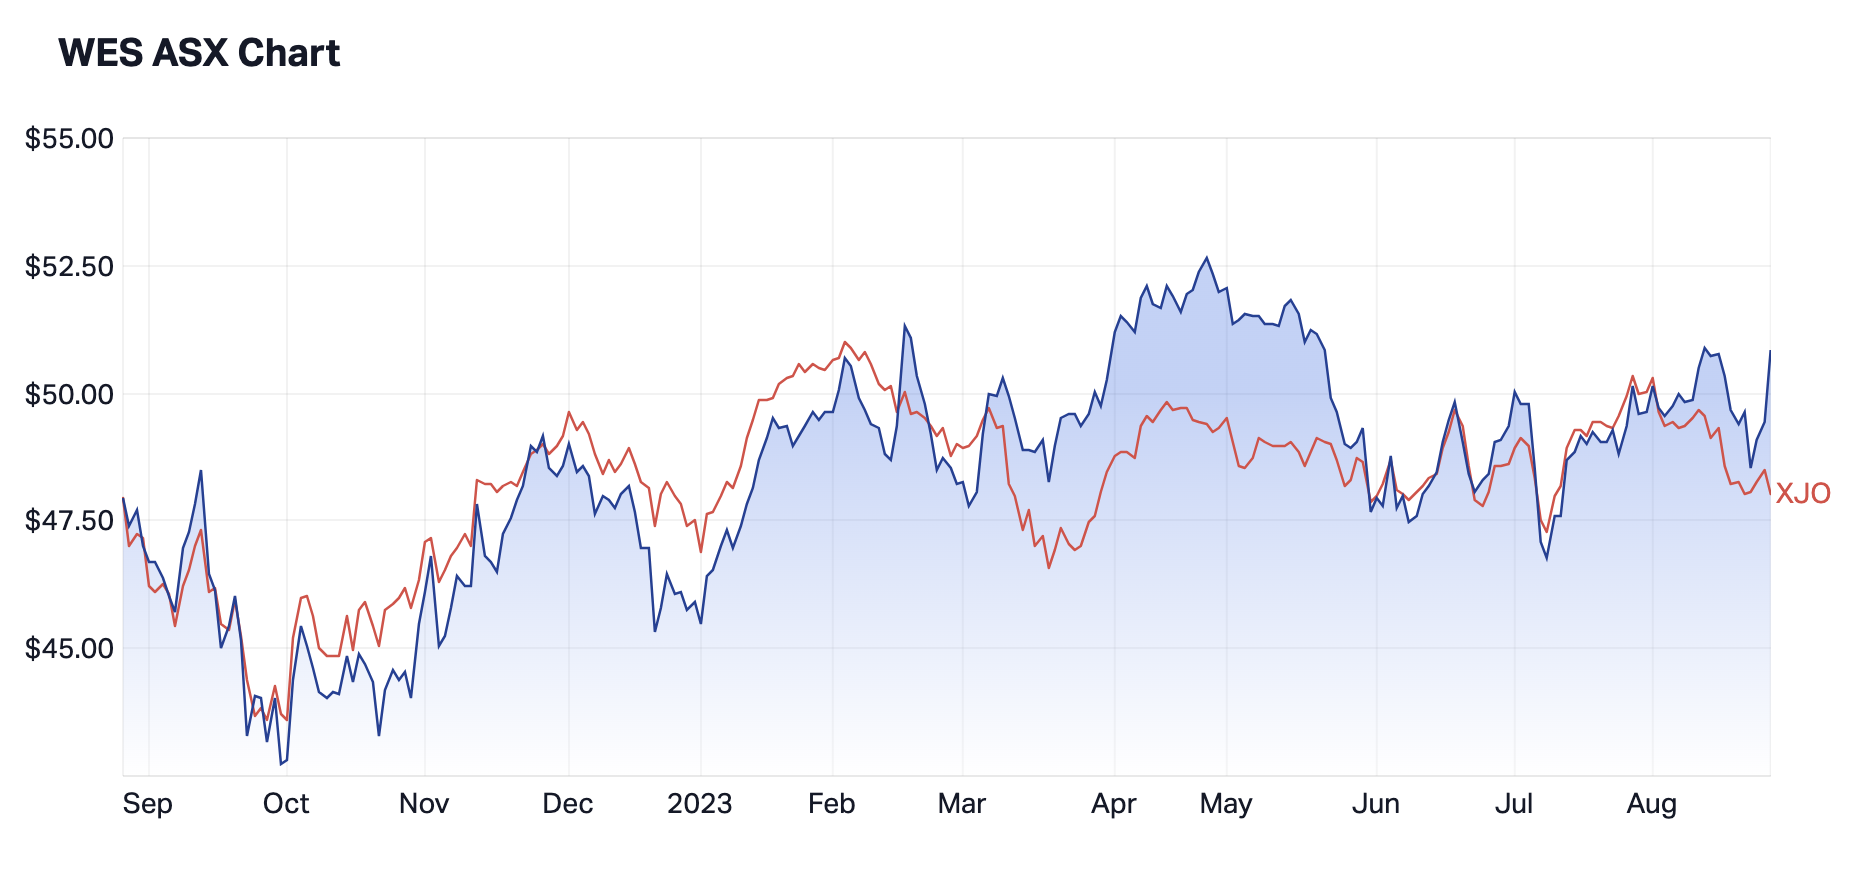 Wesfarmers 12-month share prices versus the ASX 200 (as shown in red). Source: Market Index